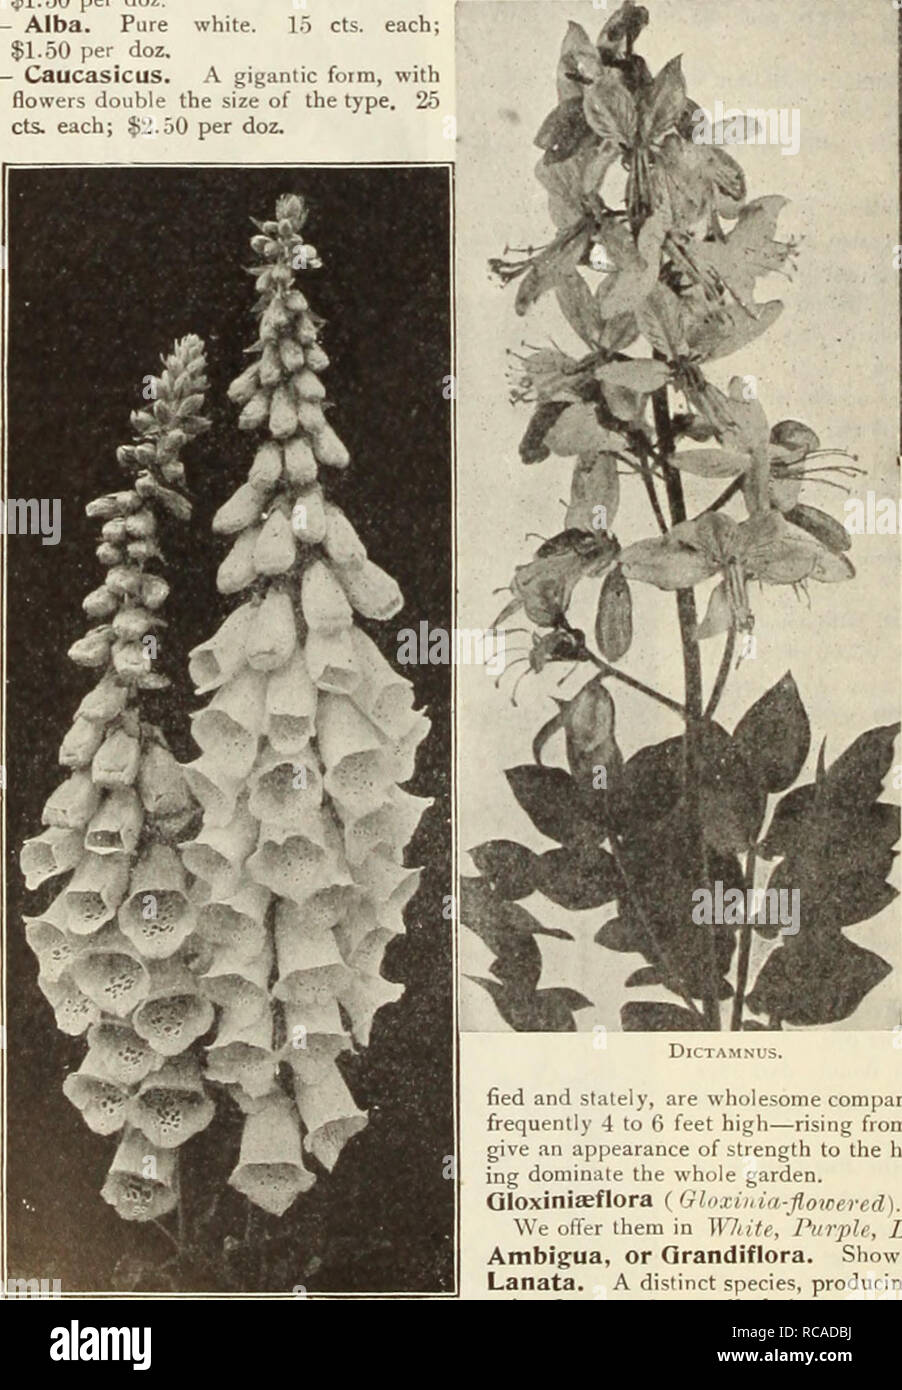 . Dreer's garden book : seventy-sixth annual edition 1914. Seeds Catalogs; Nursery stock Catalogs; Gardening Equipment and supplies Catalogs; Flowers Seeds Catalogs; Vegetables Seeds Catalogs; Fruit Seeds Catalogs. 188 HlHRTADRaR-PHIlADtLPHIAfA- HARDY nmmi plants m DIANTHUS (Pink.). Deltoides {Maiden Pink). A charming creeping variety, with medium sized pink flowers; especially suited for the rock garden. Latifolius atrOCOCCineuS Fl. PI. A beautiful summer bedding variety, producing masses of brilliant fiery crimson double flowers throughout the entire season. NeglectUS ( Glacier Pink). Masses Stock Photo